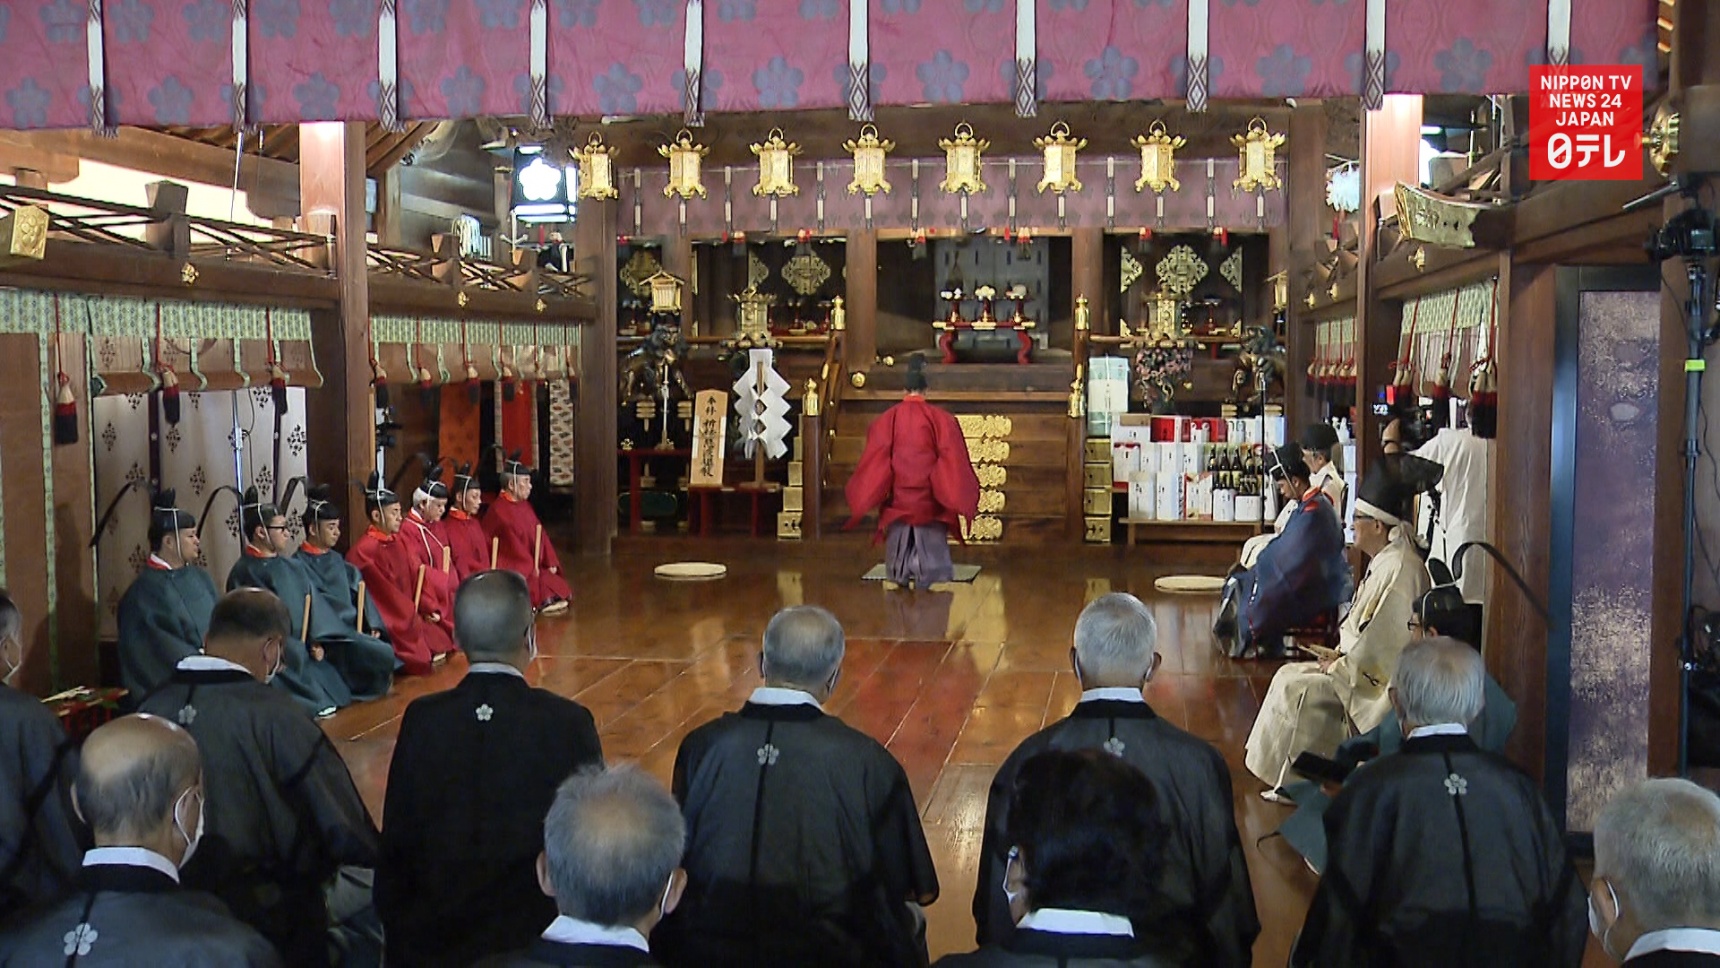 Private Shinto Ritual Streamed to Viewers